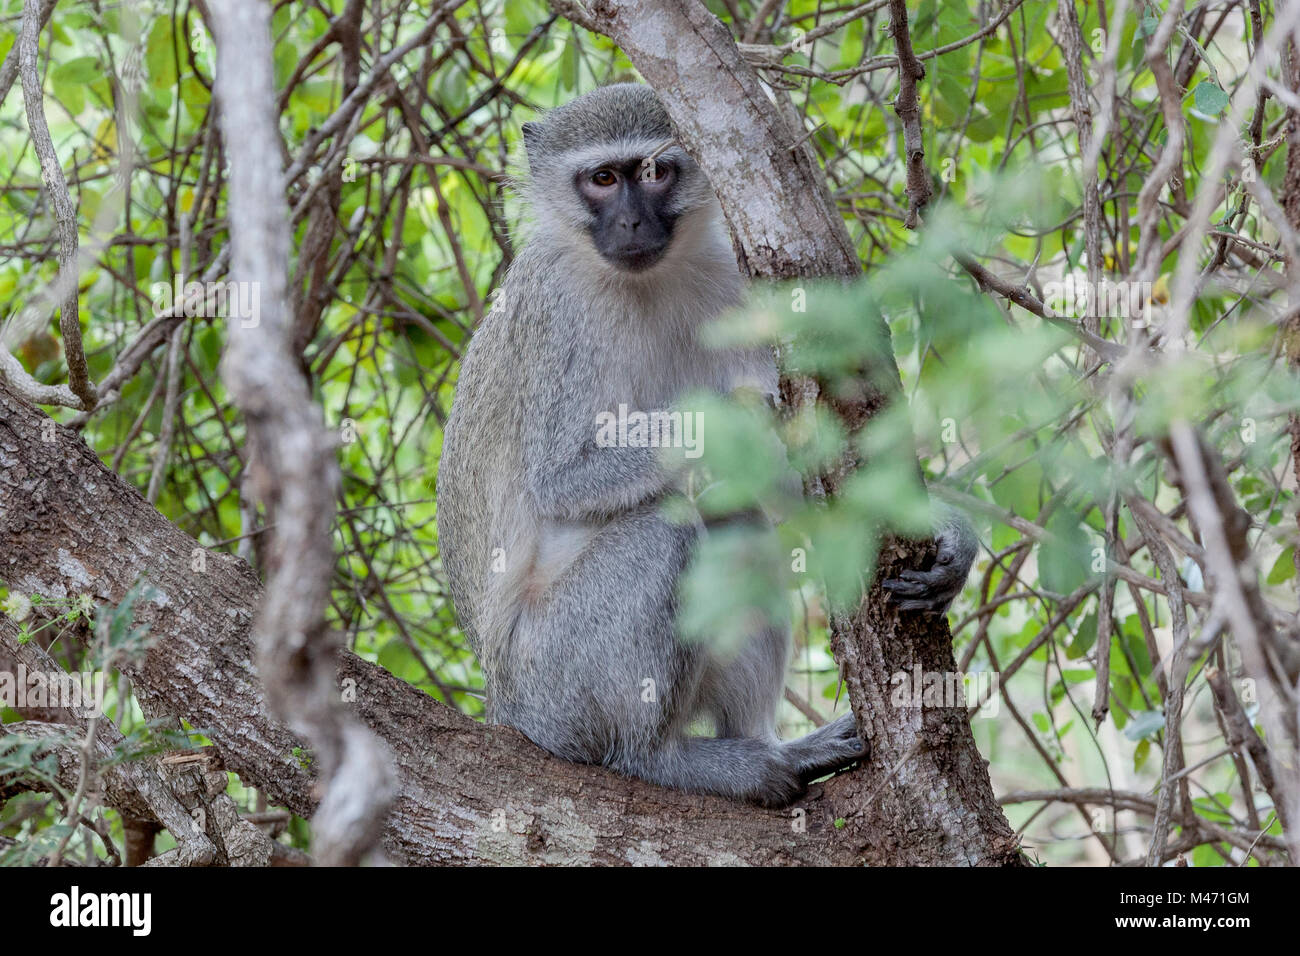 A cute monkey in Kruger National Park, South Africa Stock Photo